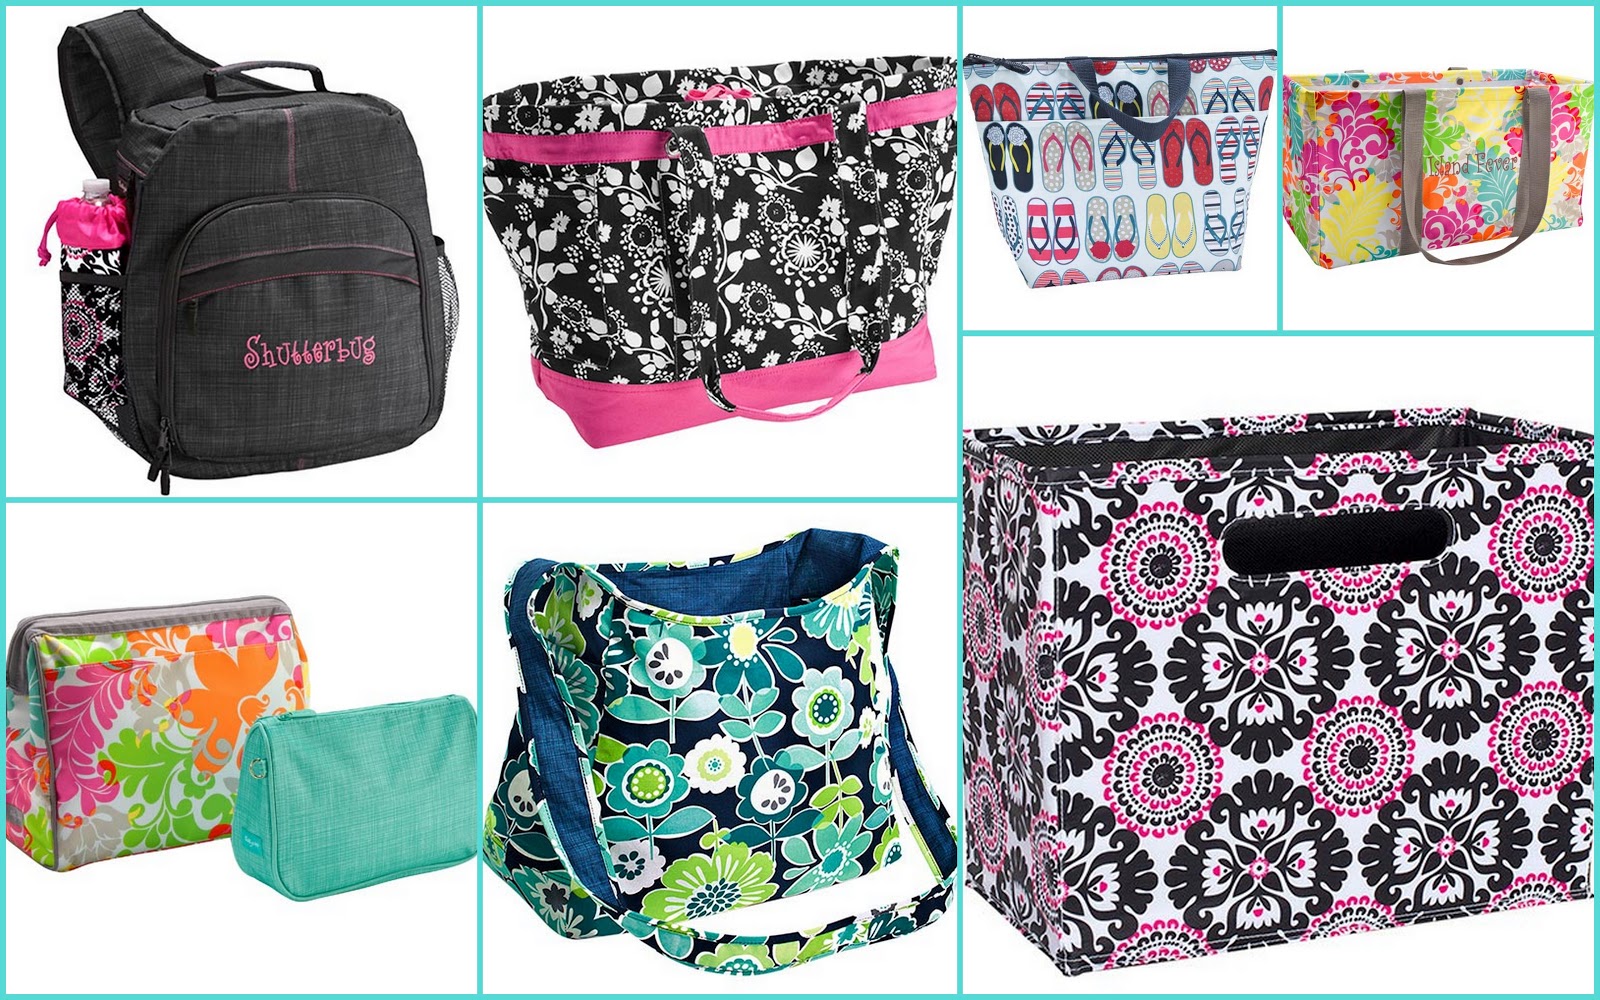 New Thirty-One Spring 2013 Patterns coming 1/4/13.  Thirty one consultant, Thirty  one gifts, Thirty one